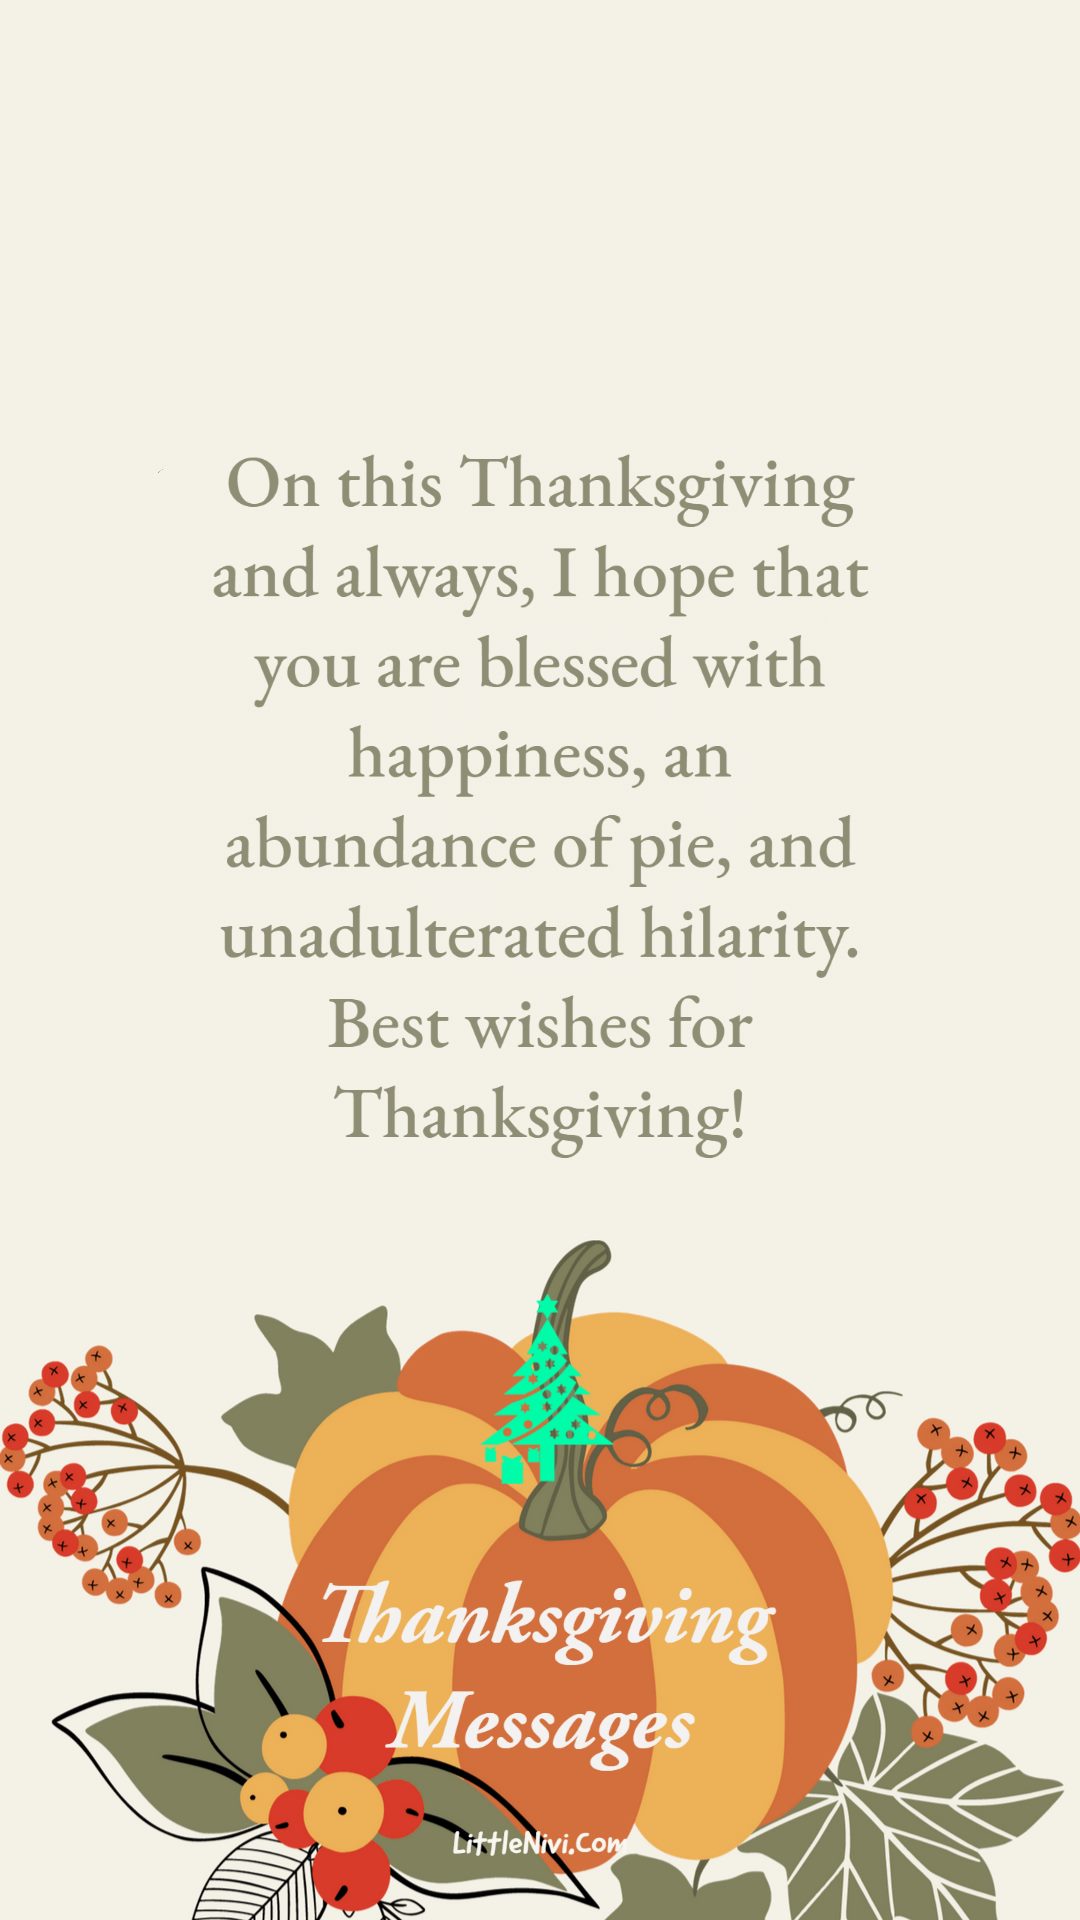 best thanksgiving quotes and messages for friends family